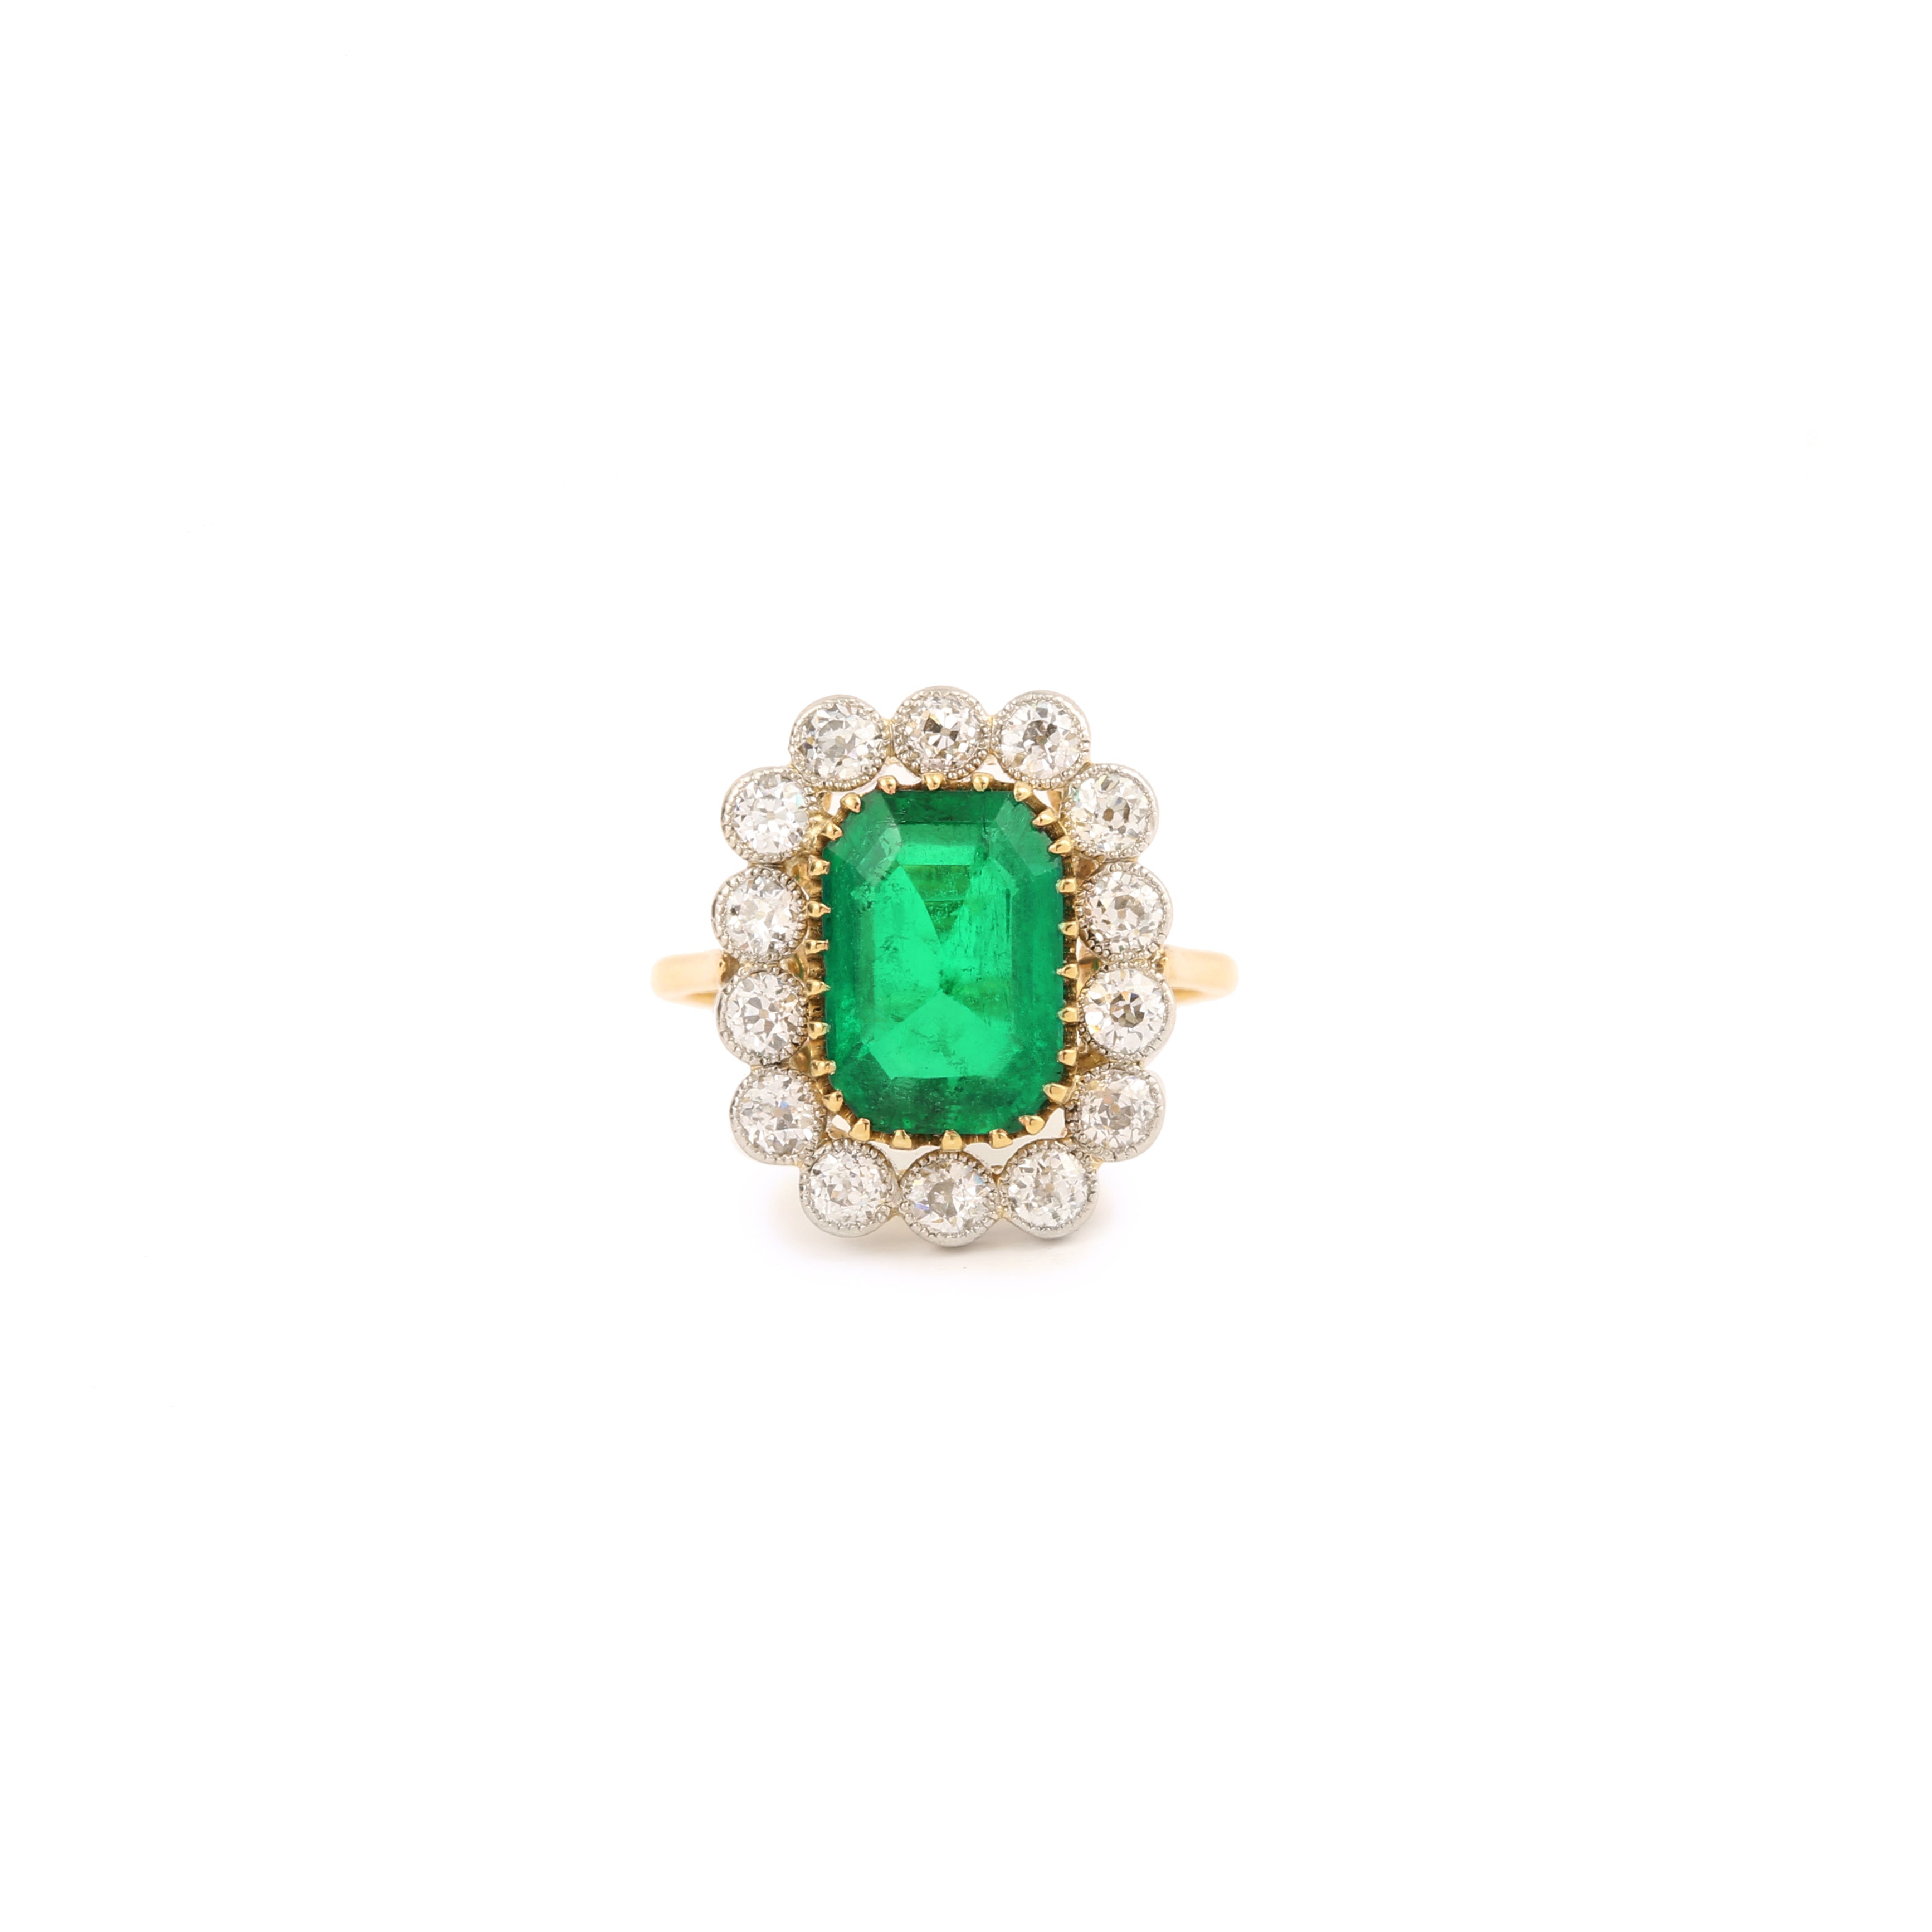 Certified 3 Carats Colombian Emerald Diamonds Platinum And 18K Yellow Gold Cluster Ring